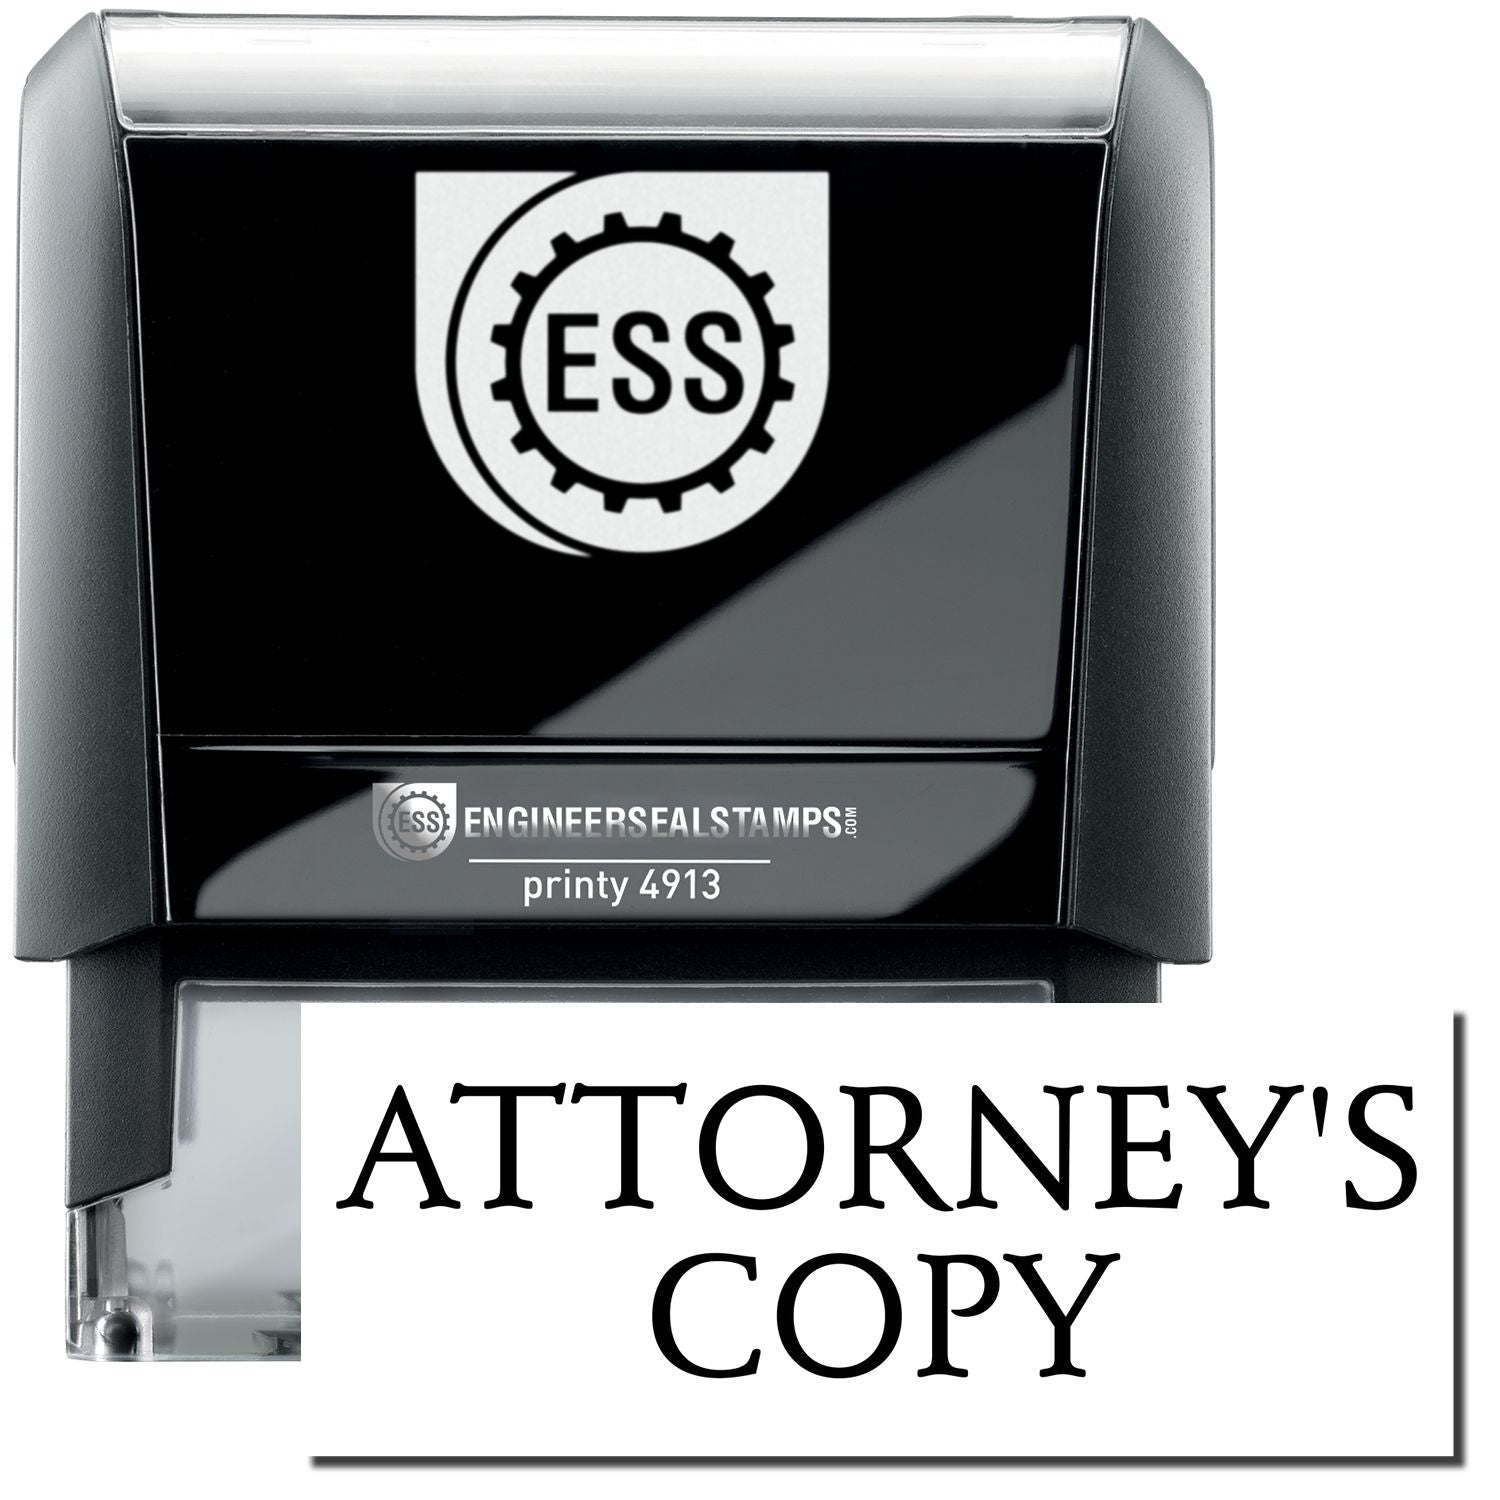 A self-inking stamp with a stamped image showing how the text "ATTORNEY'S COPY" in a large bold font is displayed by it.